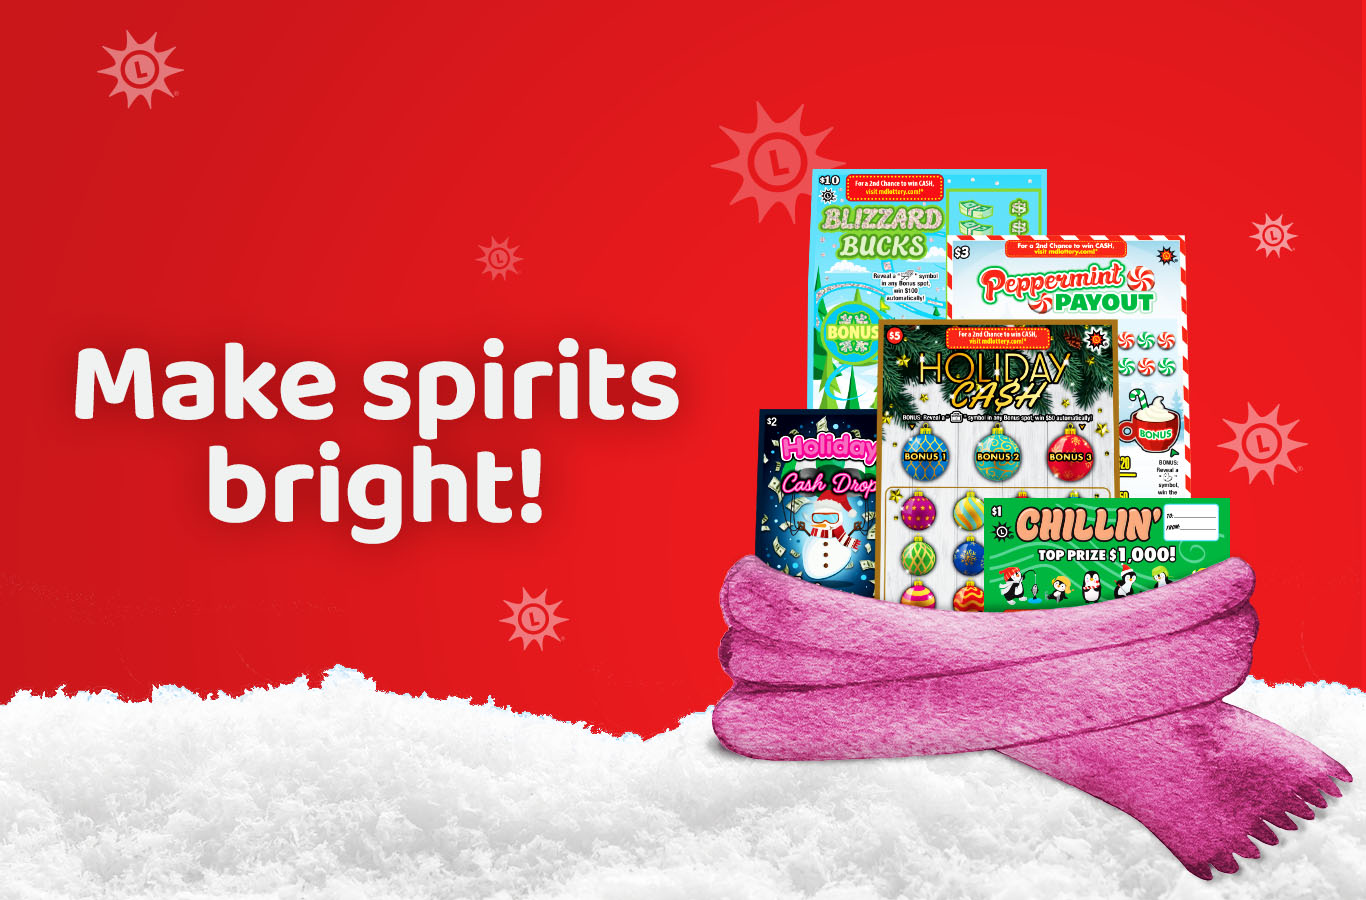 Share the cheer with new Holiday Scratch-Offs! Play for your chance to win up to $100,000 instantly or up to $25,000 in second-chance drawings.